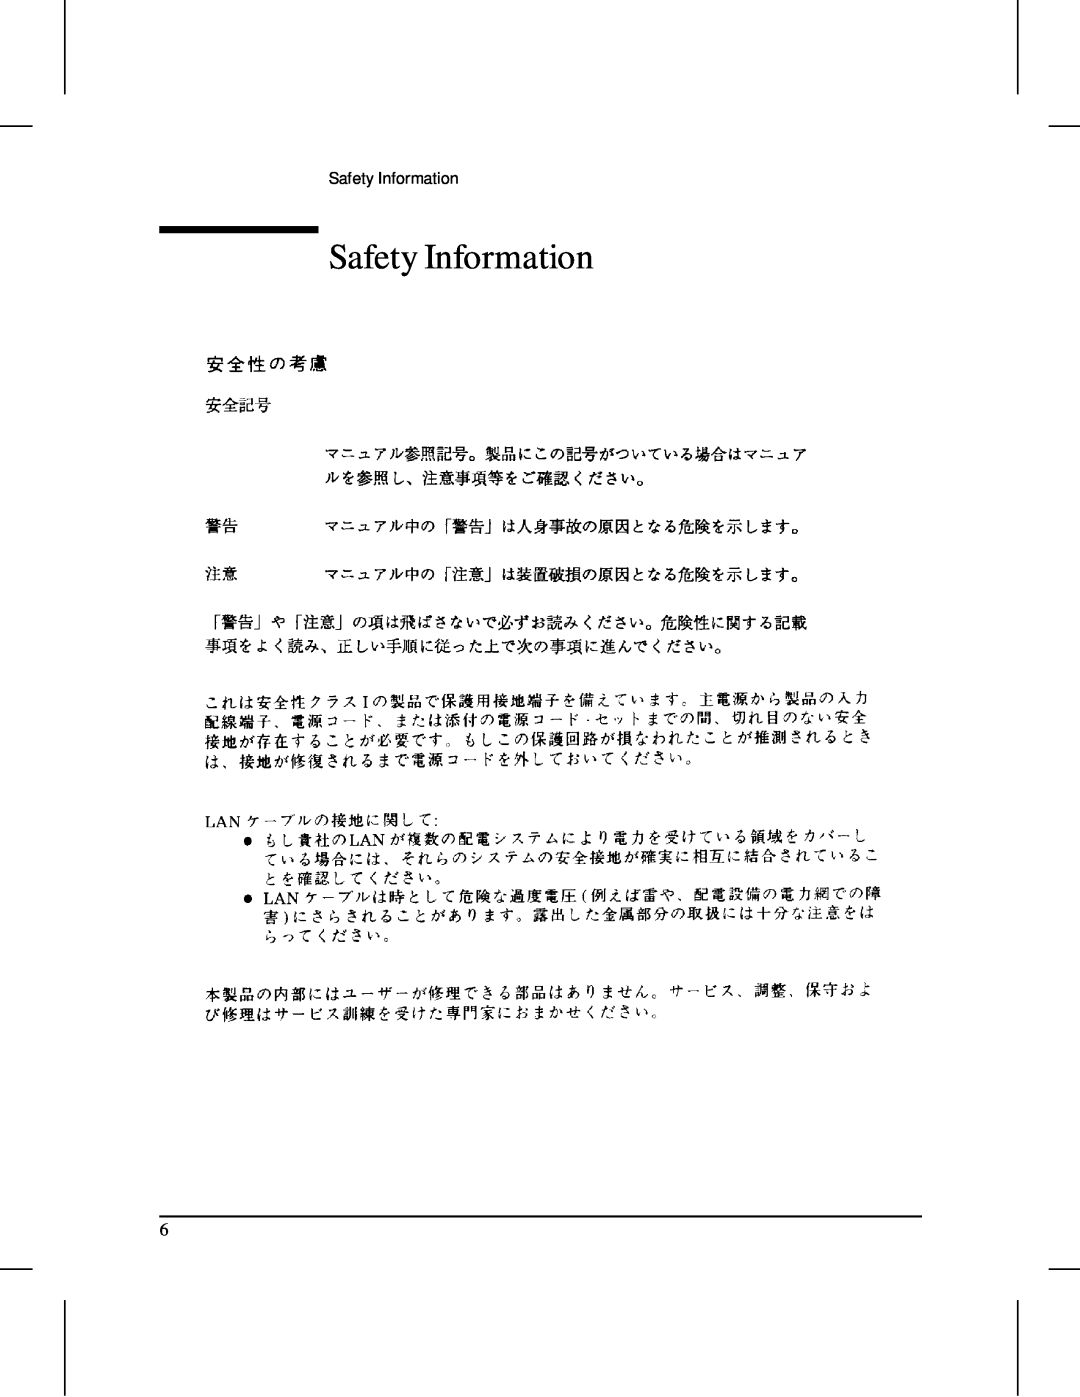 HP 480 manual Safety Information 